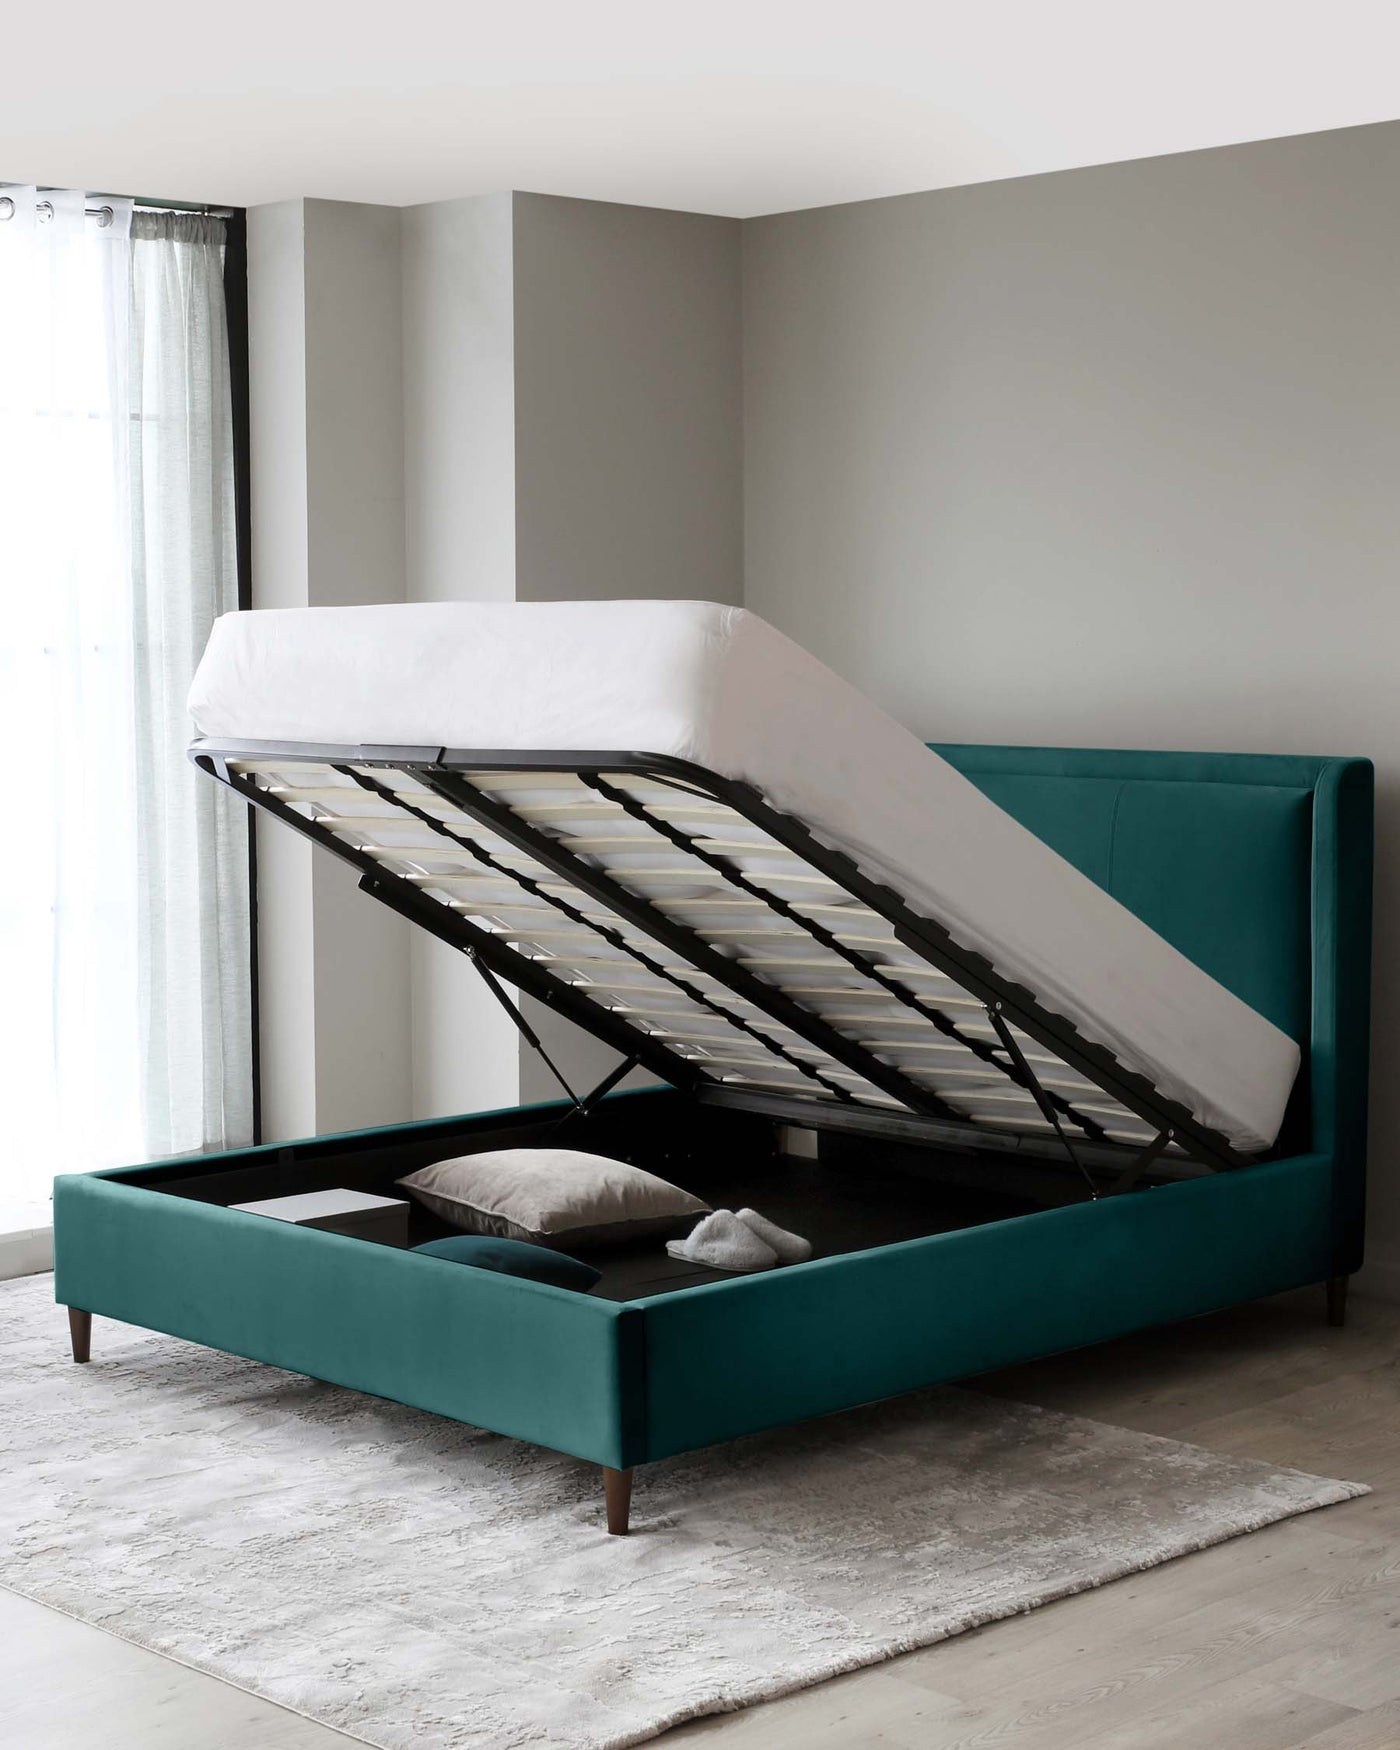 Elegant teal upholstered storage bed with the mattress lifted to reveal a spacious under-bed storage compartment; features a sleek, contemporary design with a high headboard and wooden legs, complemented by a pale grey area rug underneath.